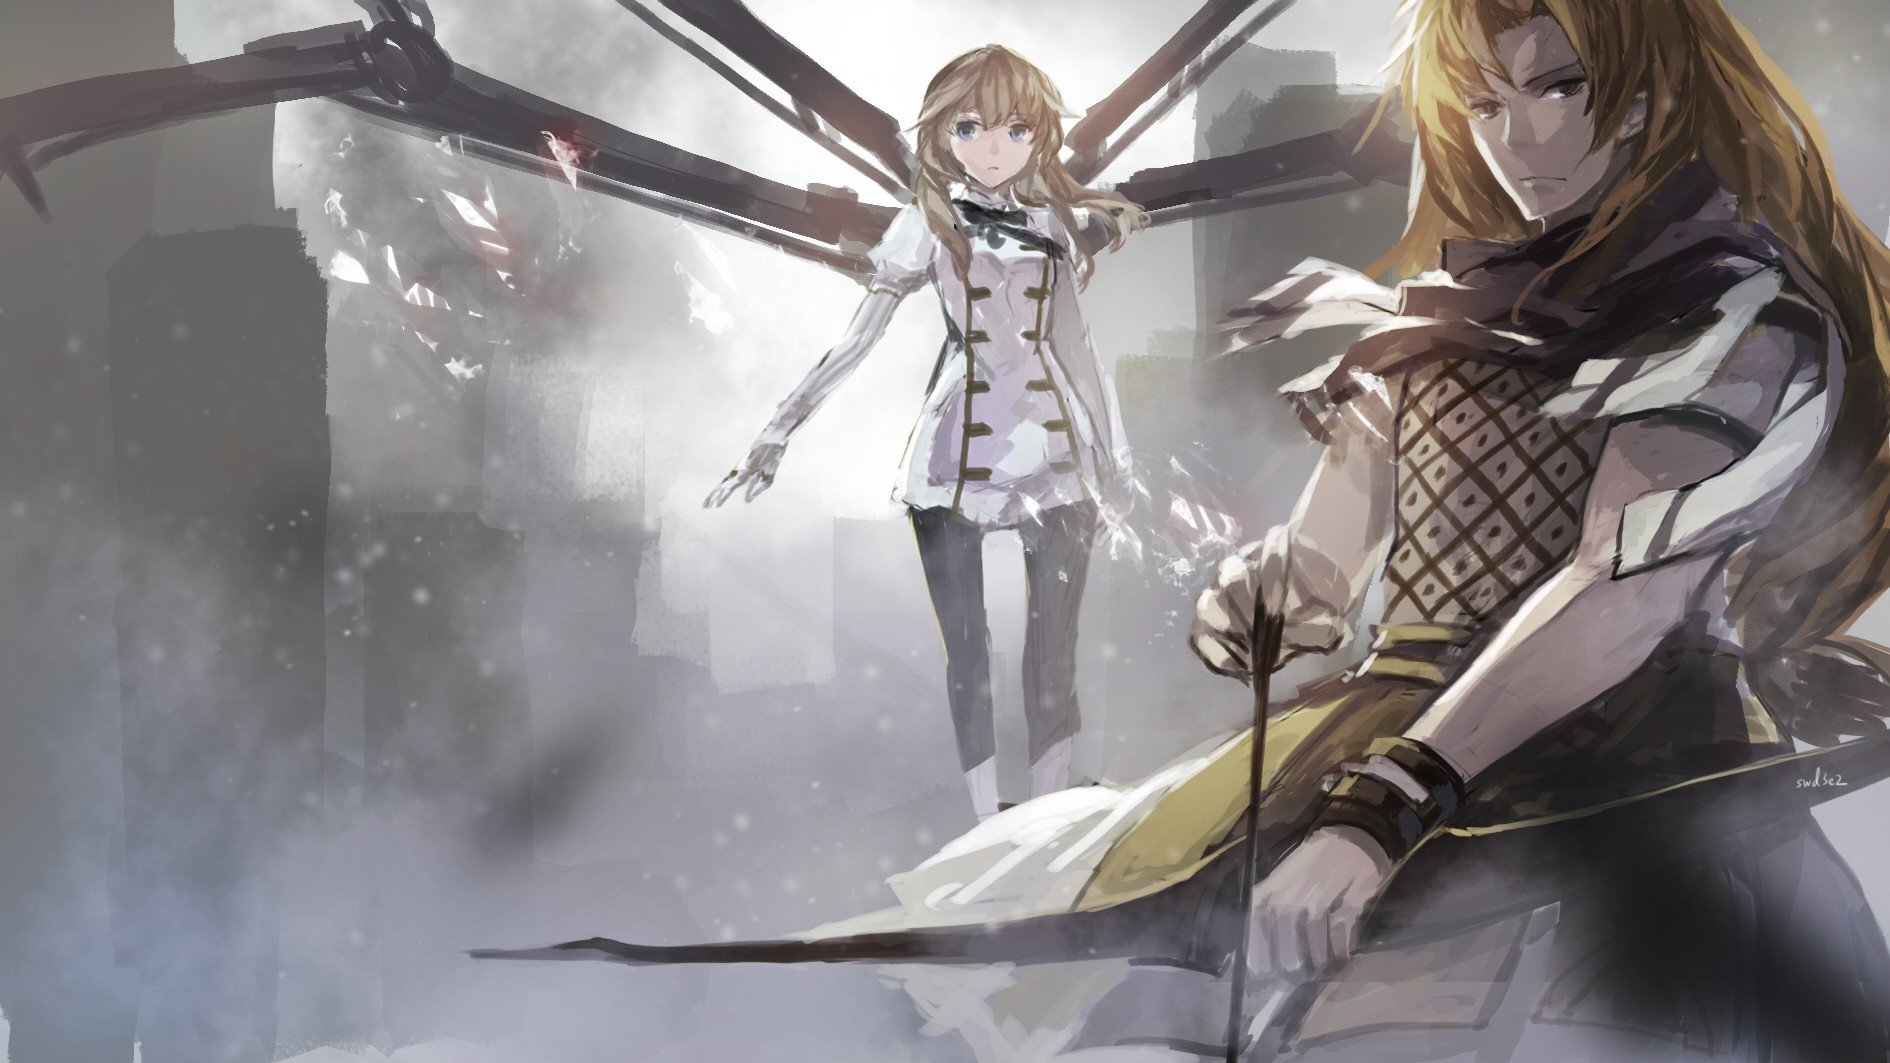 anime girls, Anime, Swd3e2, Blonde, Bows, Long hair, Fate Series, Fate Apocrypha Wallpaper